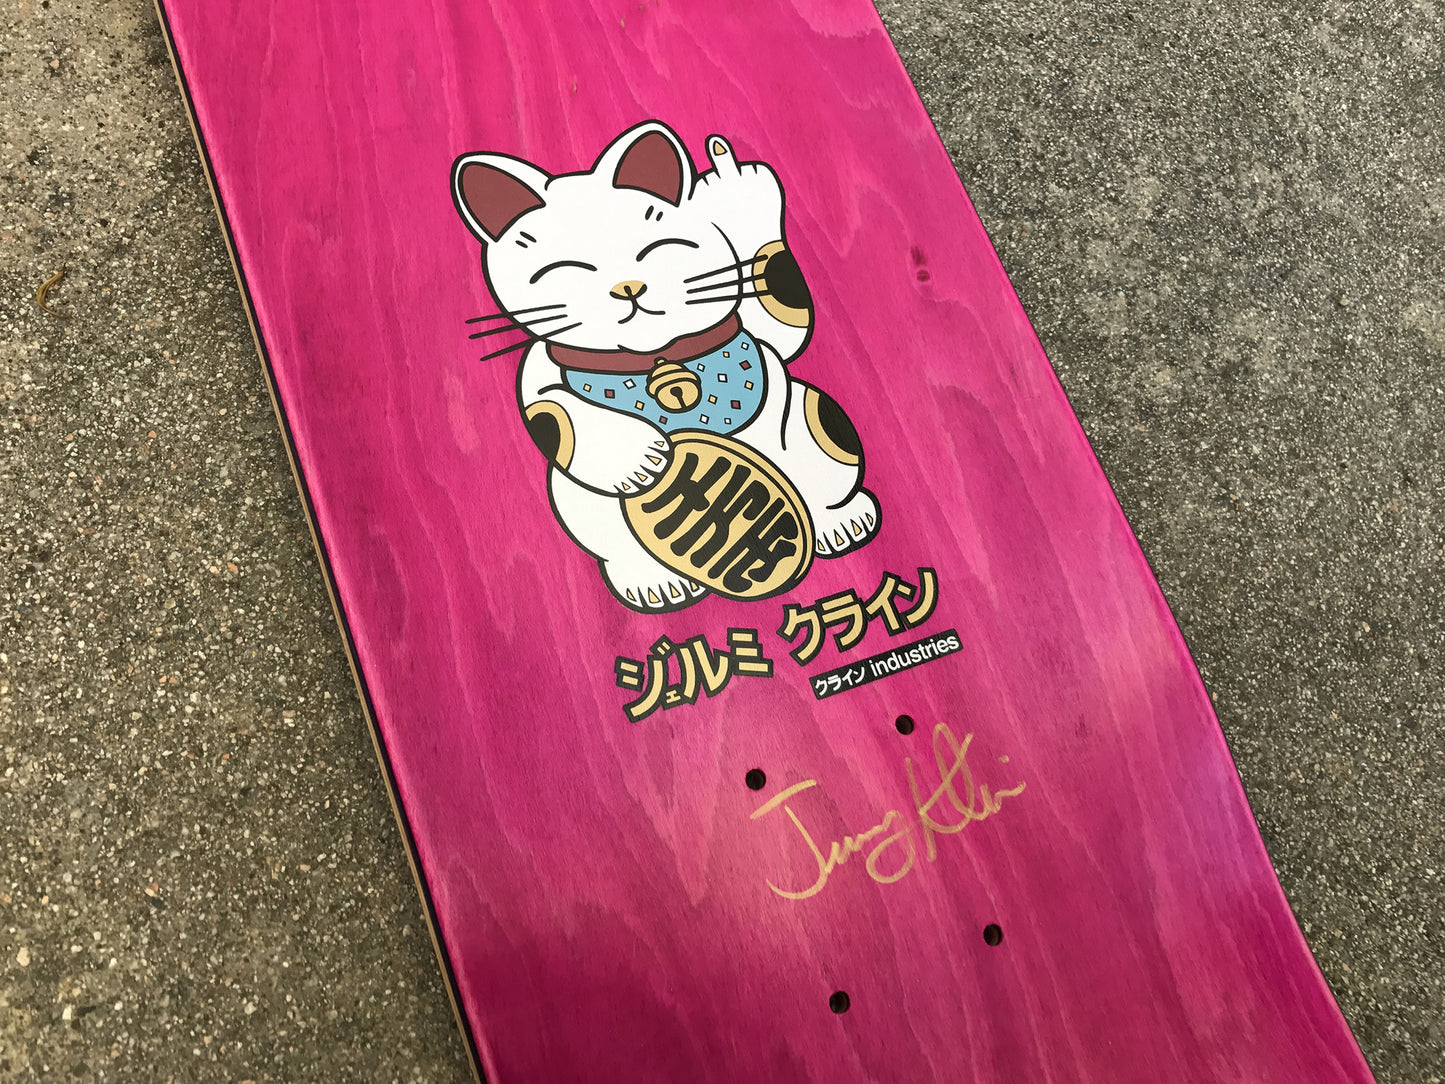 unlucky cat PEARL PINK 8.0 X 31.75 SIGNED